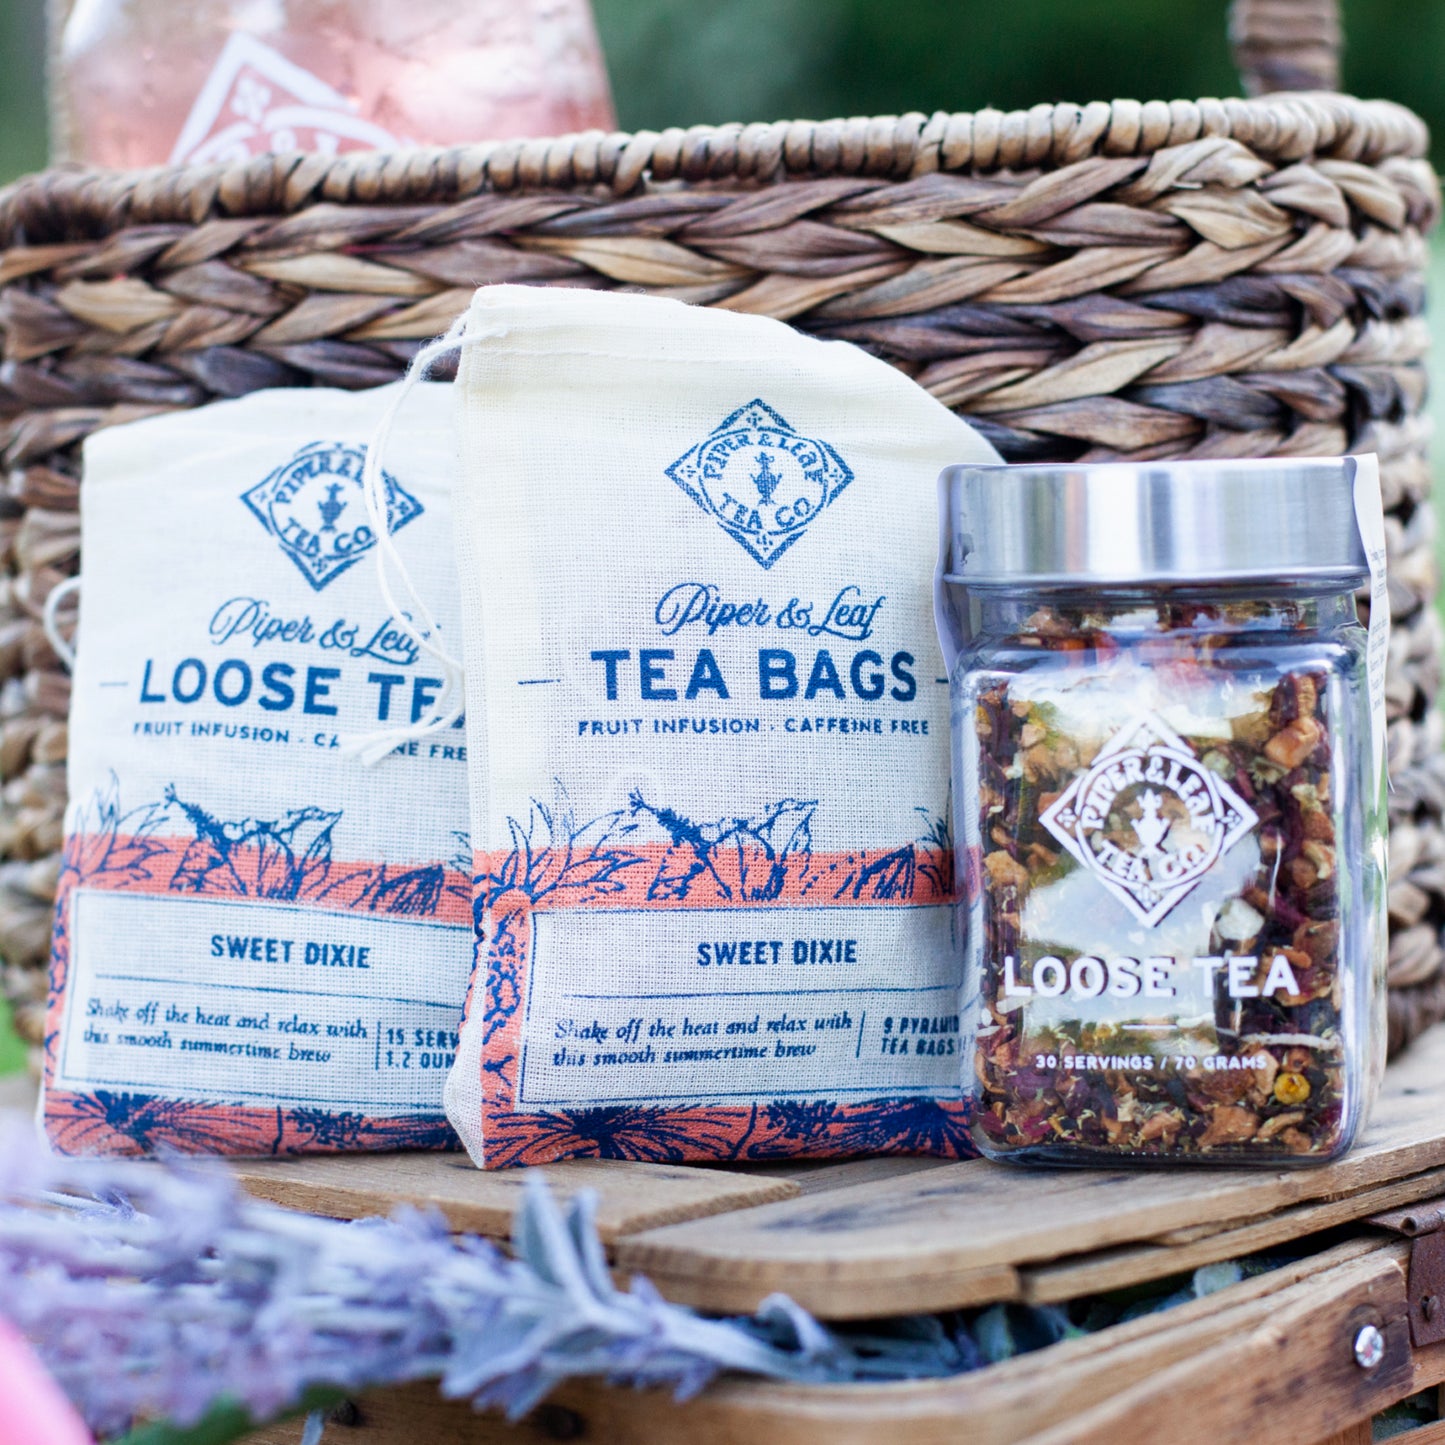 A wicker basket containing various labeled products including Sweet Dixie 9ct Tea Bags in Muslin and a jar of tea infusions from Piper & Leaf Tea Co., displayed outdoors on a wooden surface.